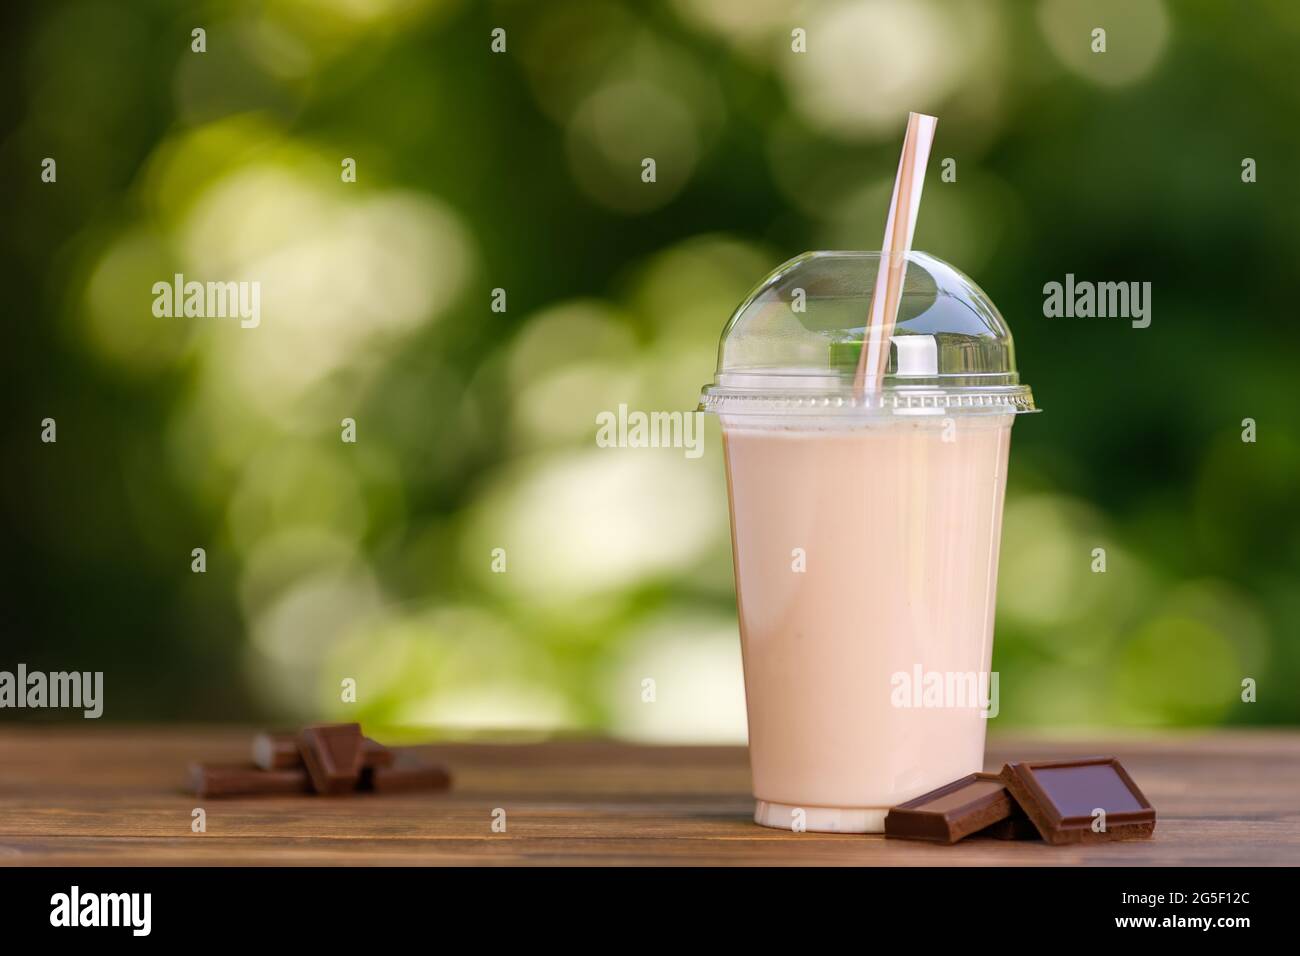 11,673 Milk Shake Plastic Cup Images, Stock Photos, 3D objects